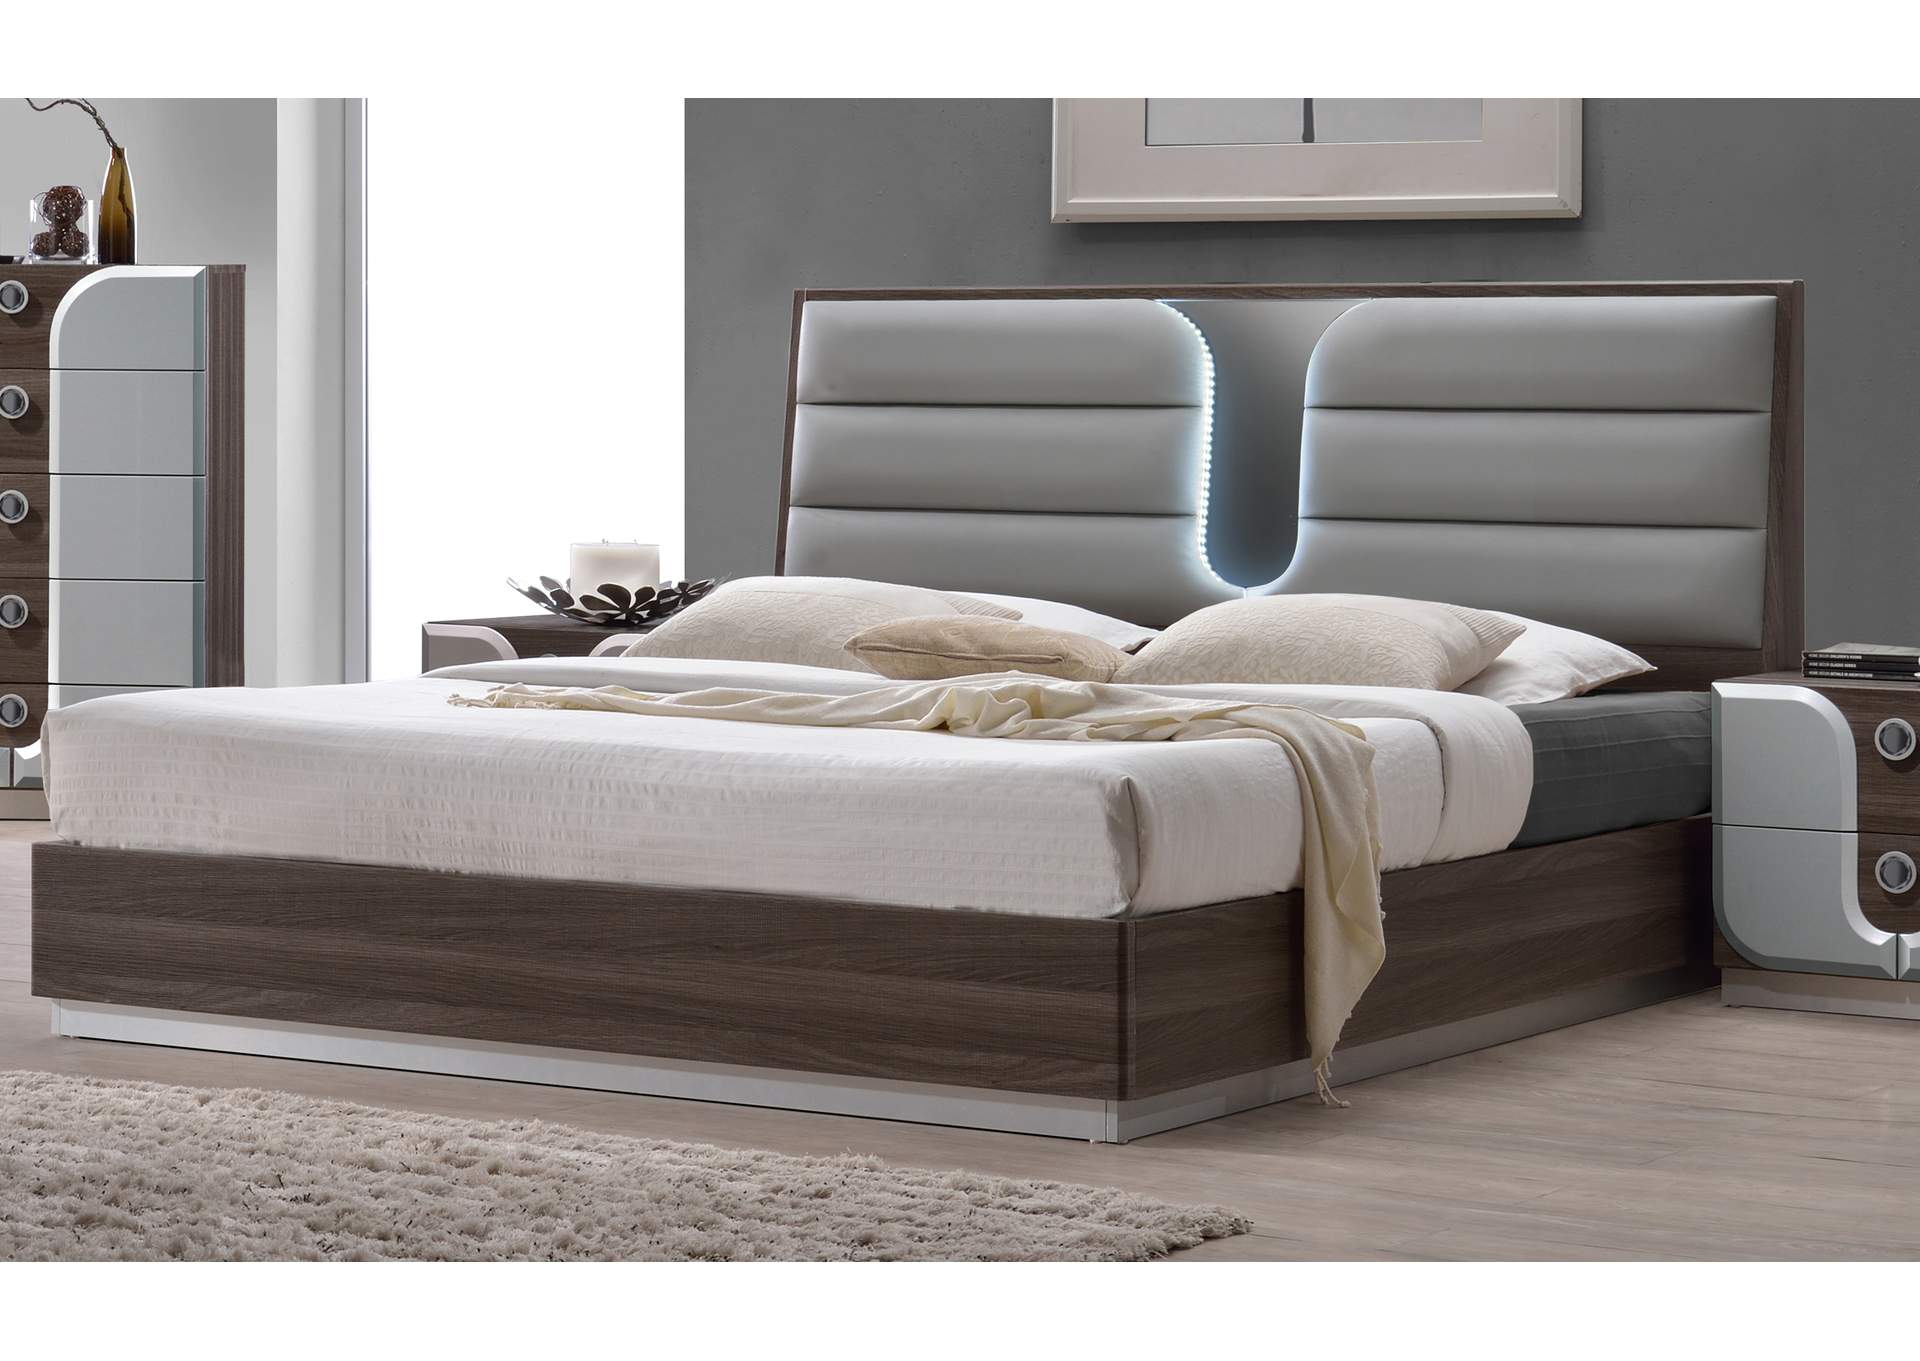 Modern Queen Size Bed,Chintaly Imports